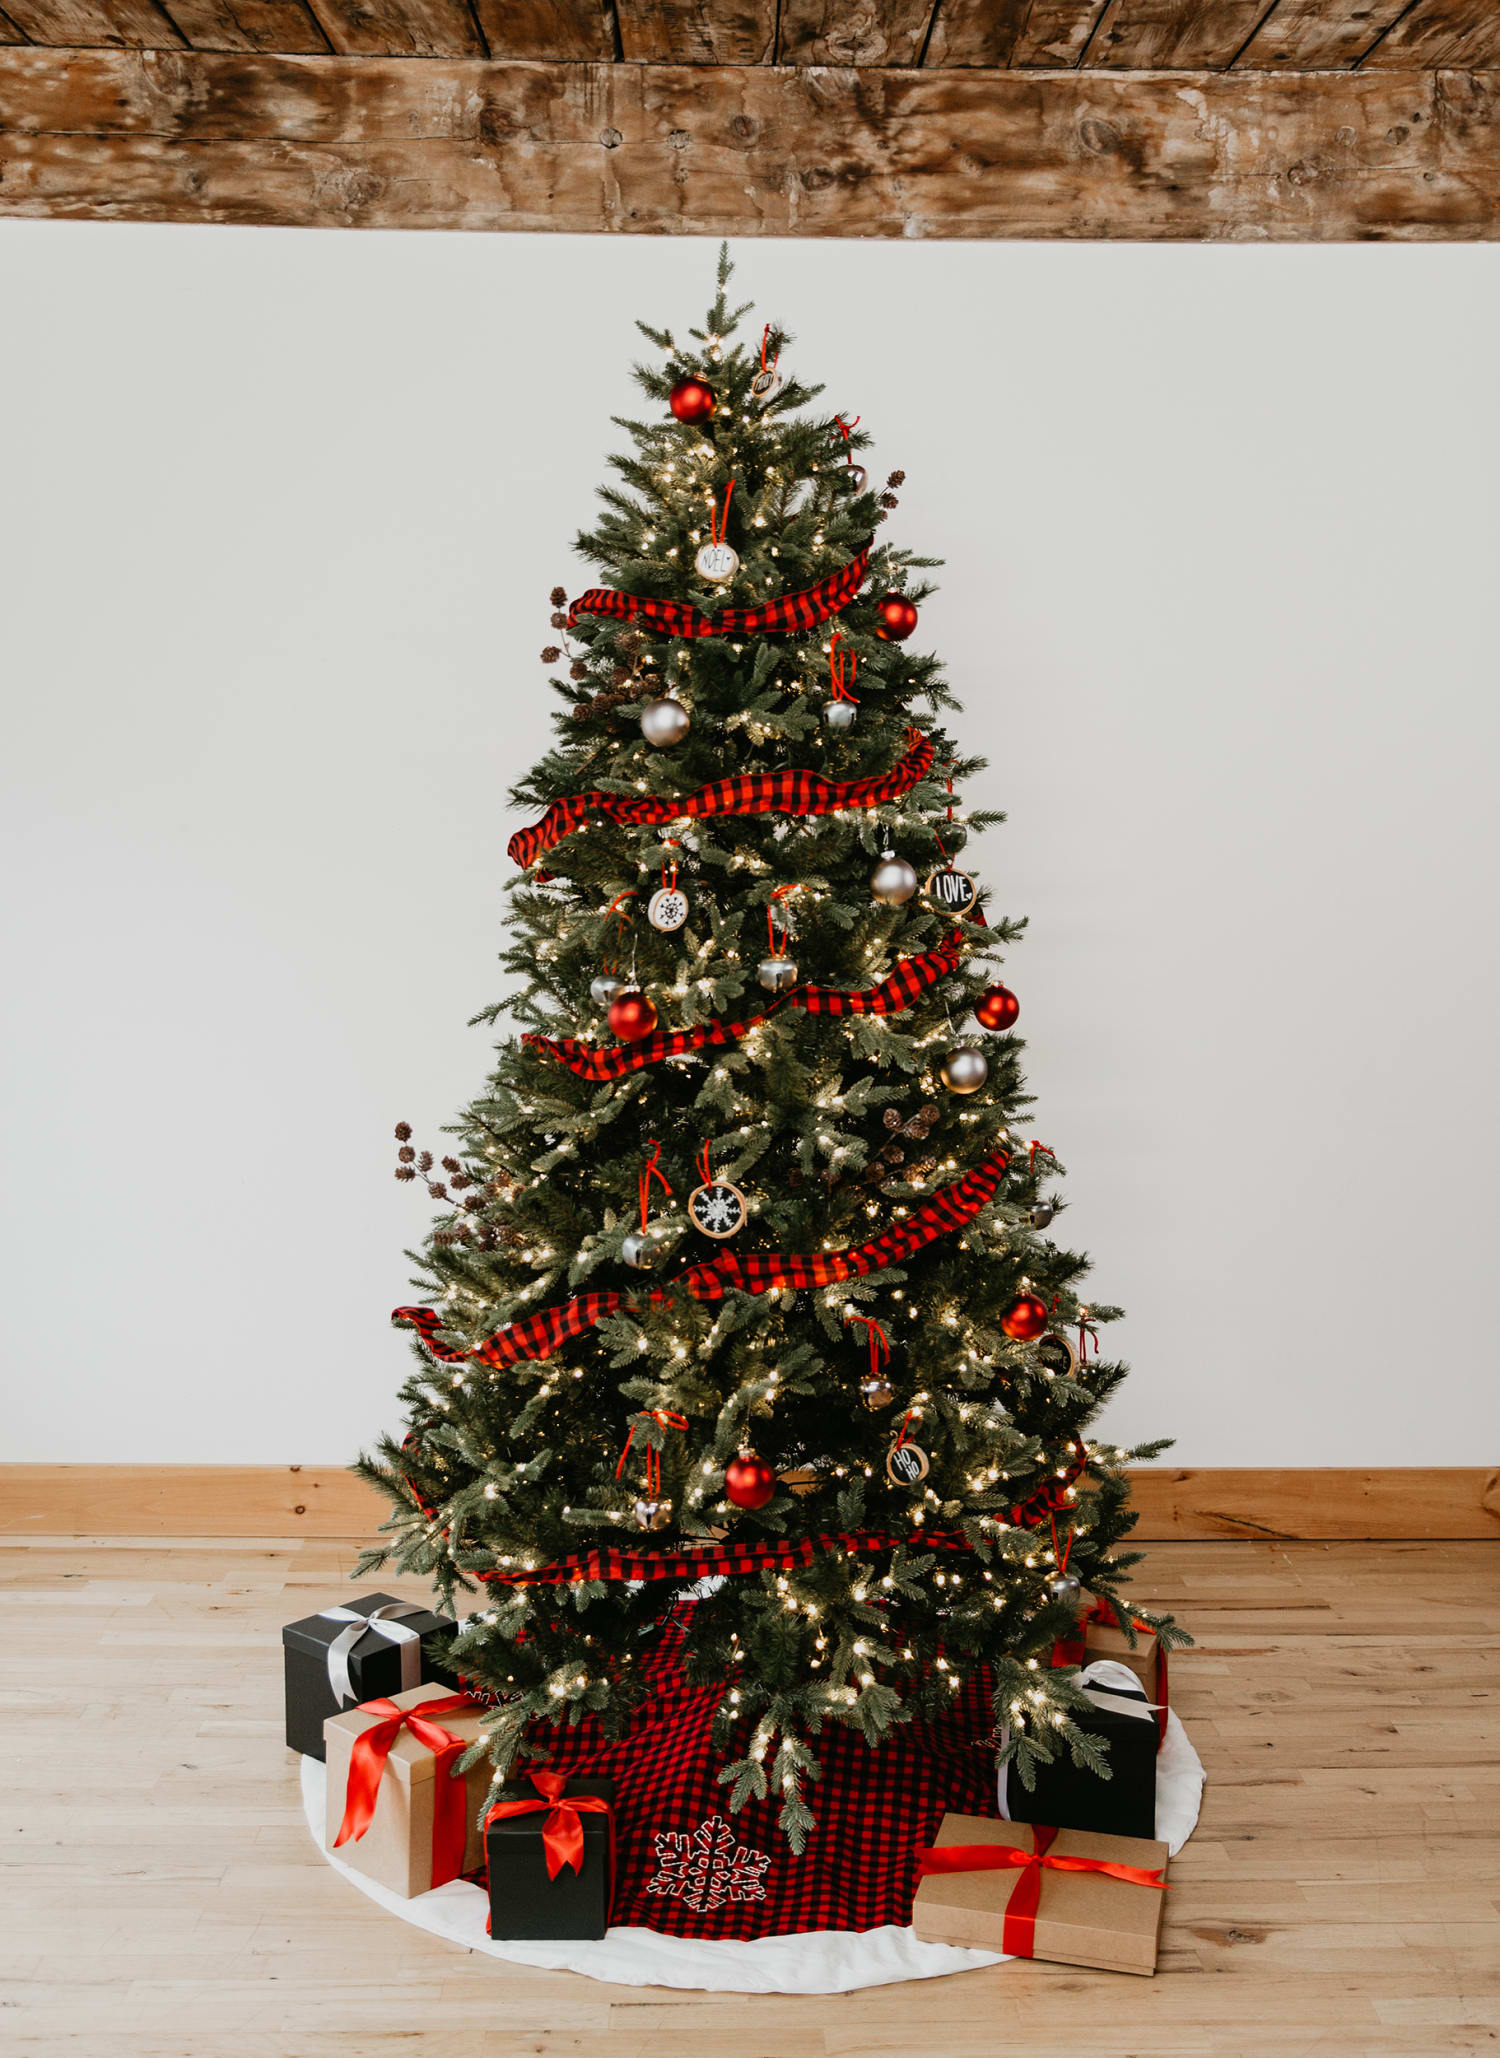 Types of Christmas tree: 12 real trees for your holiday decor | Gardeningetc